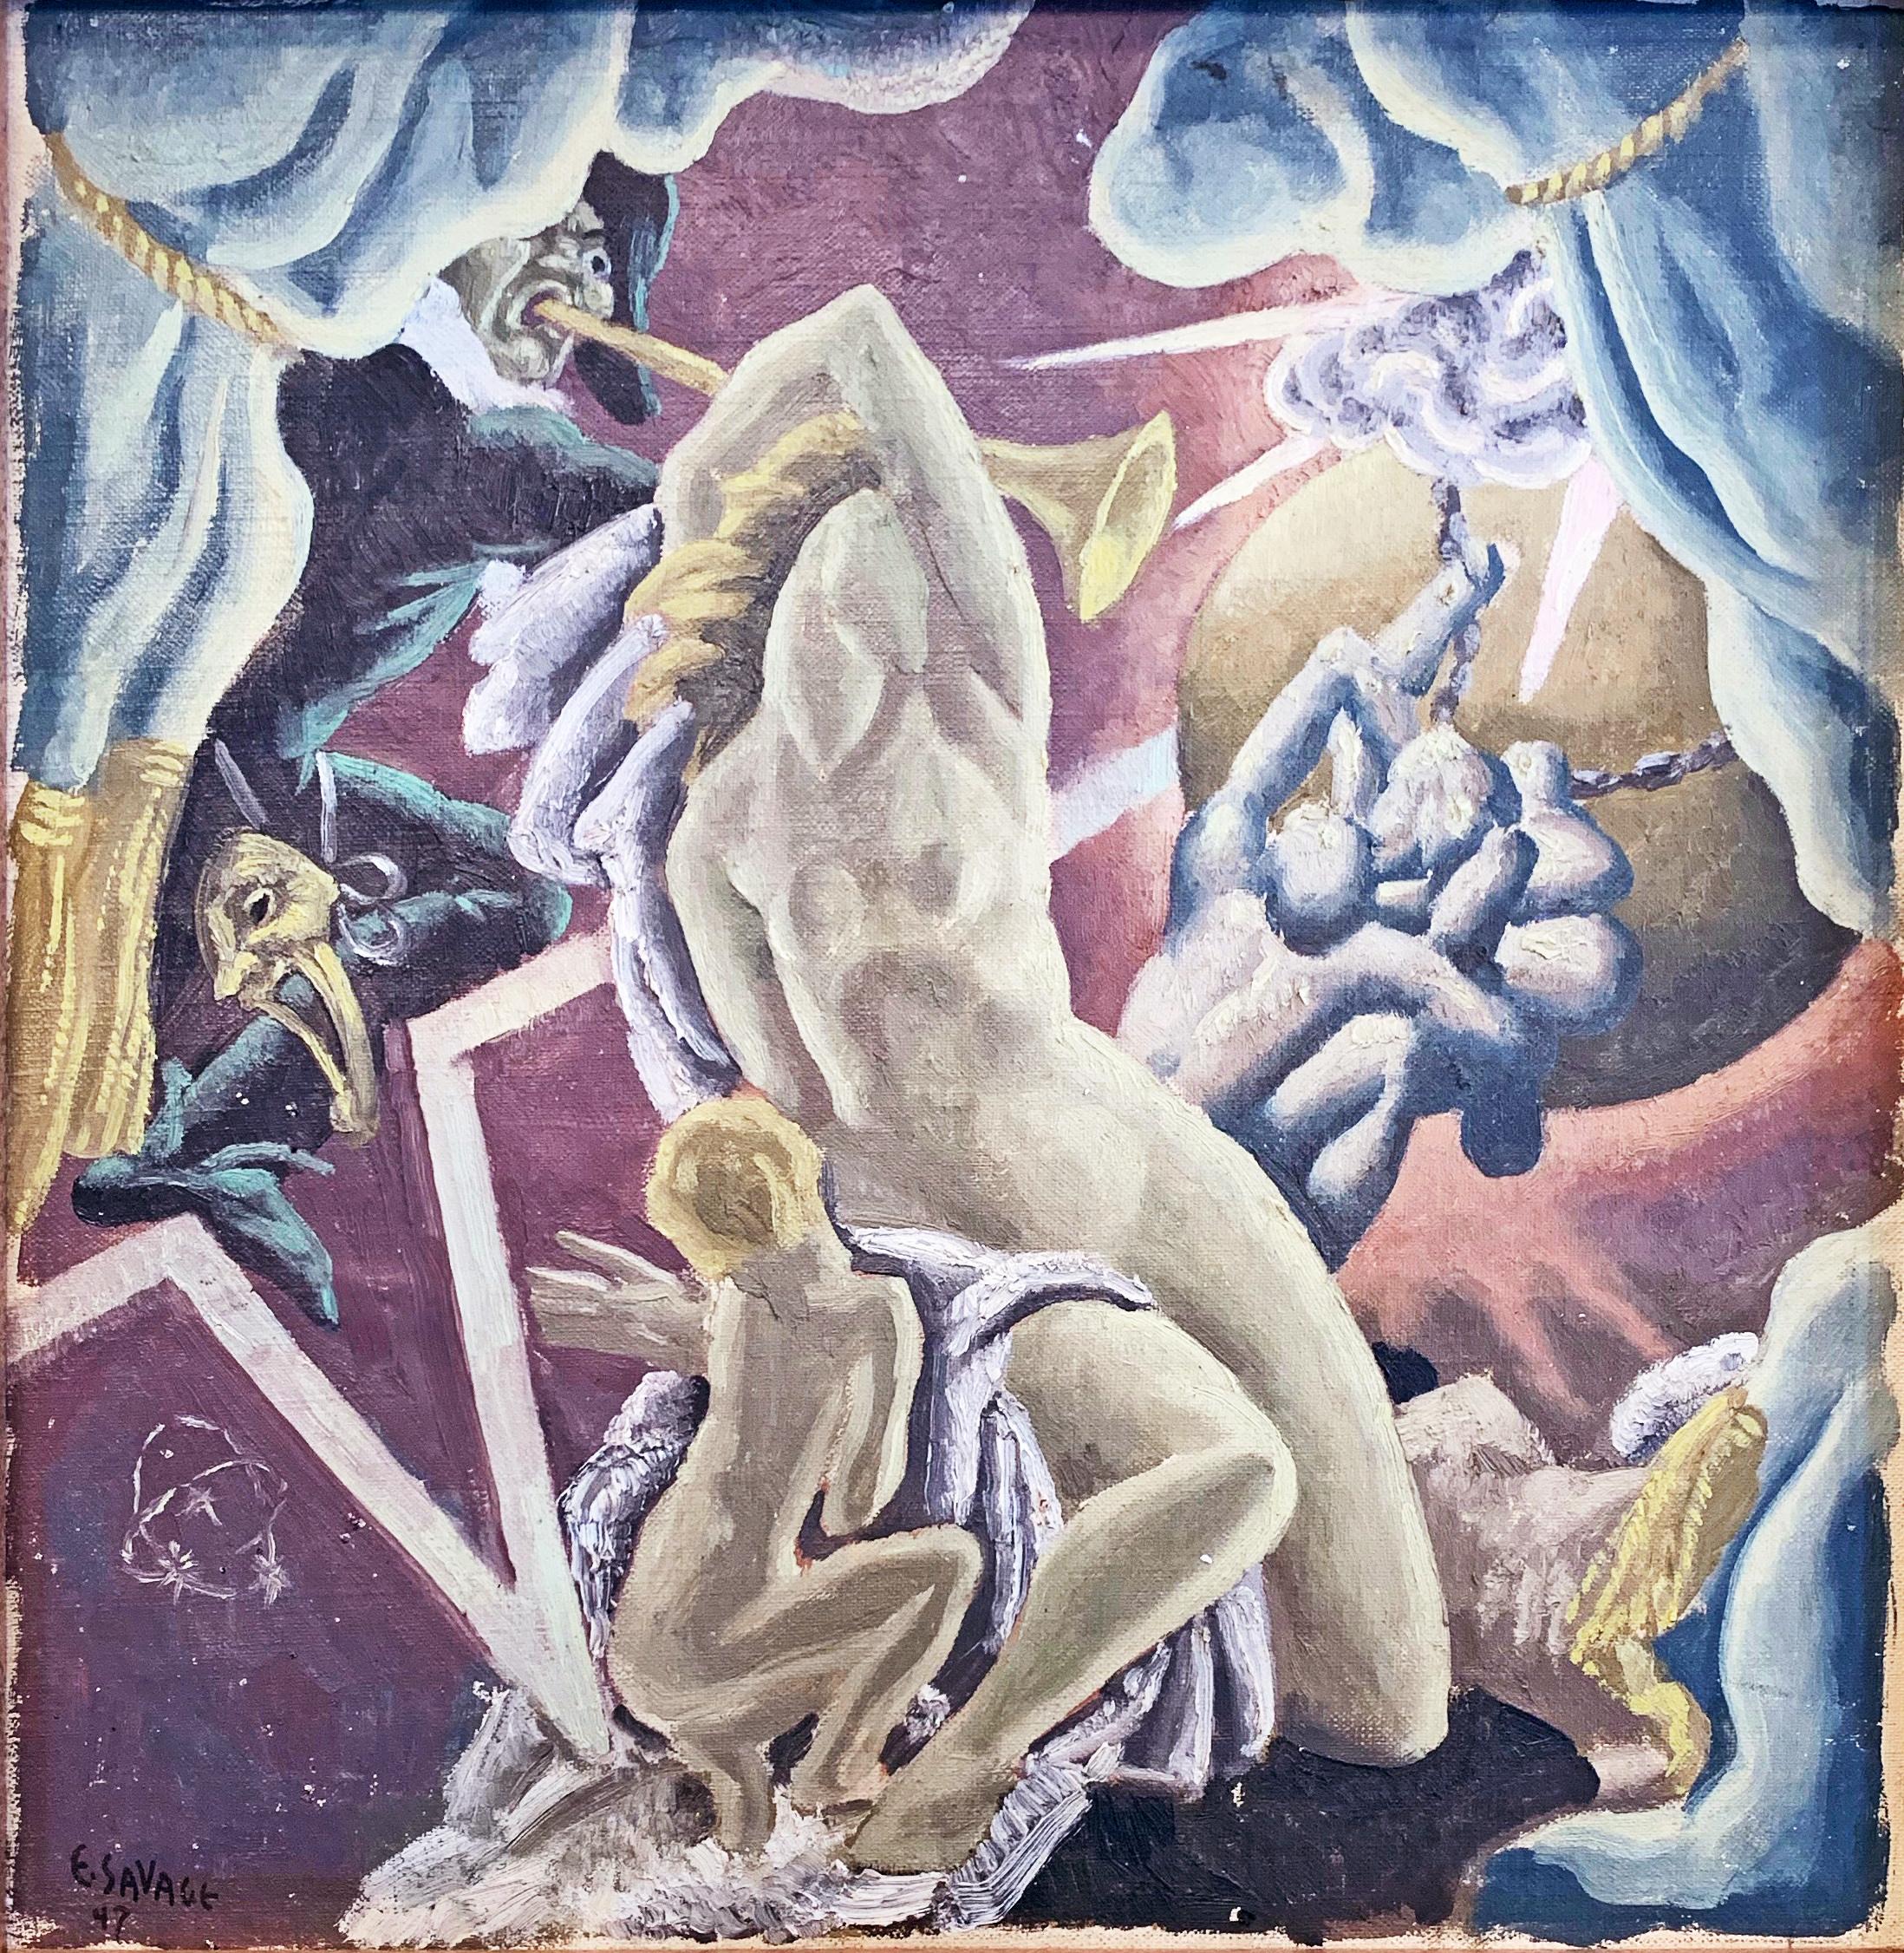 This extraordinary, almost surreal scene by one of America's leading muralists in the Art Deco period, Eugene Savage, depicts a floating female nude on the stage, with figures of Comedy and Tragedy blowing trumpets to her right, theater curtains